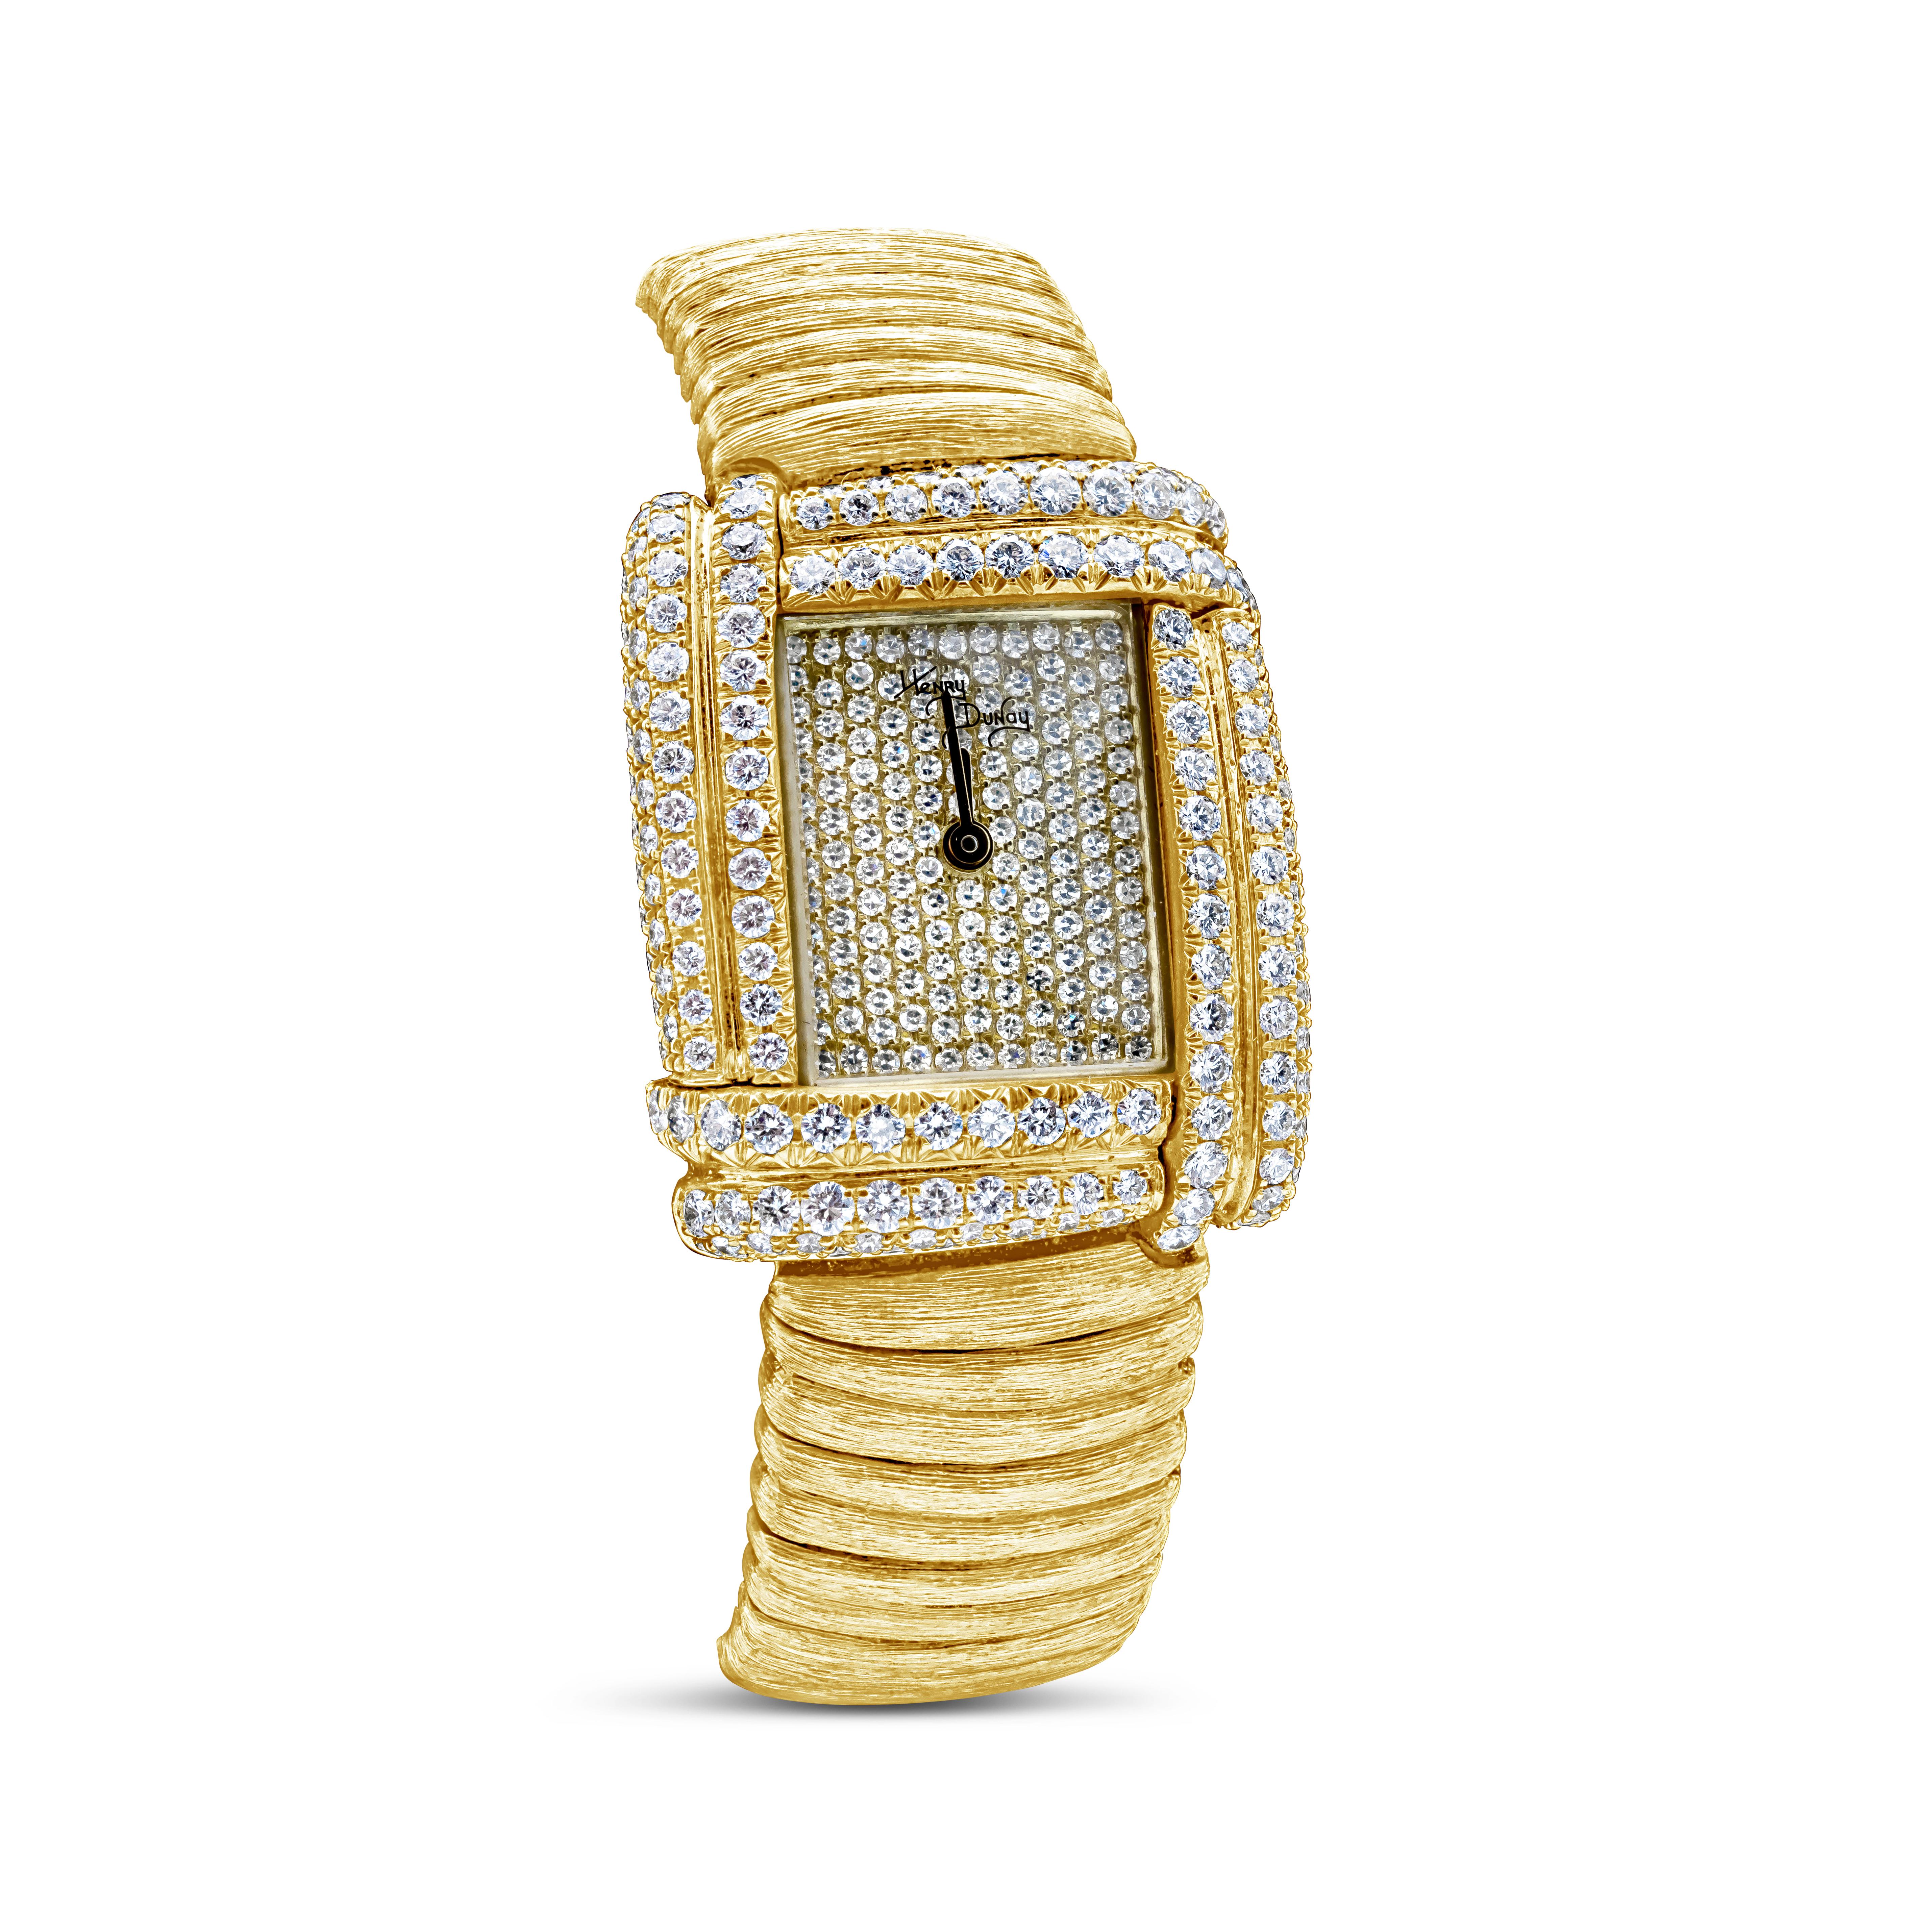 This beautiful watch is encrusted with 216 brilliant round diamonds. Diamonds weighing 2.40 carats total, E-F color and VS clarity. Made in 18 karat yellow gold. Approximately 116 grams